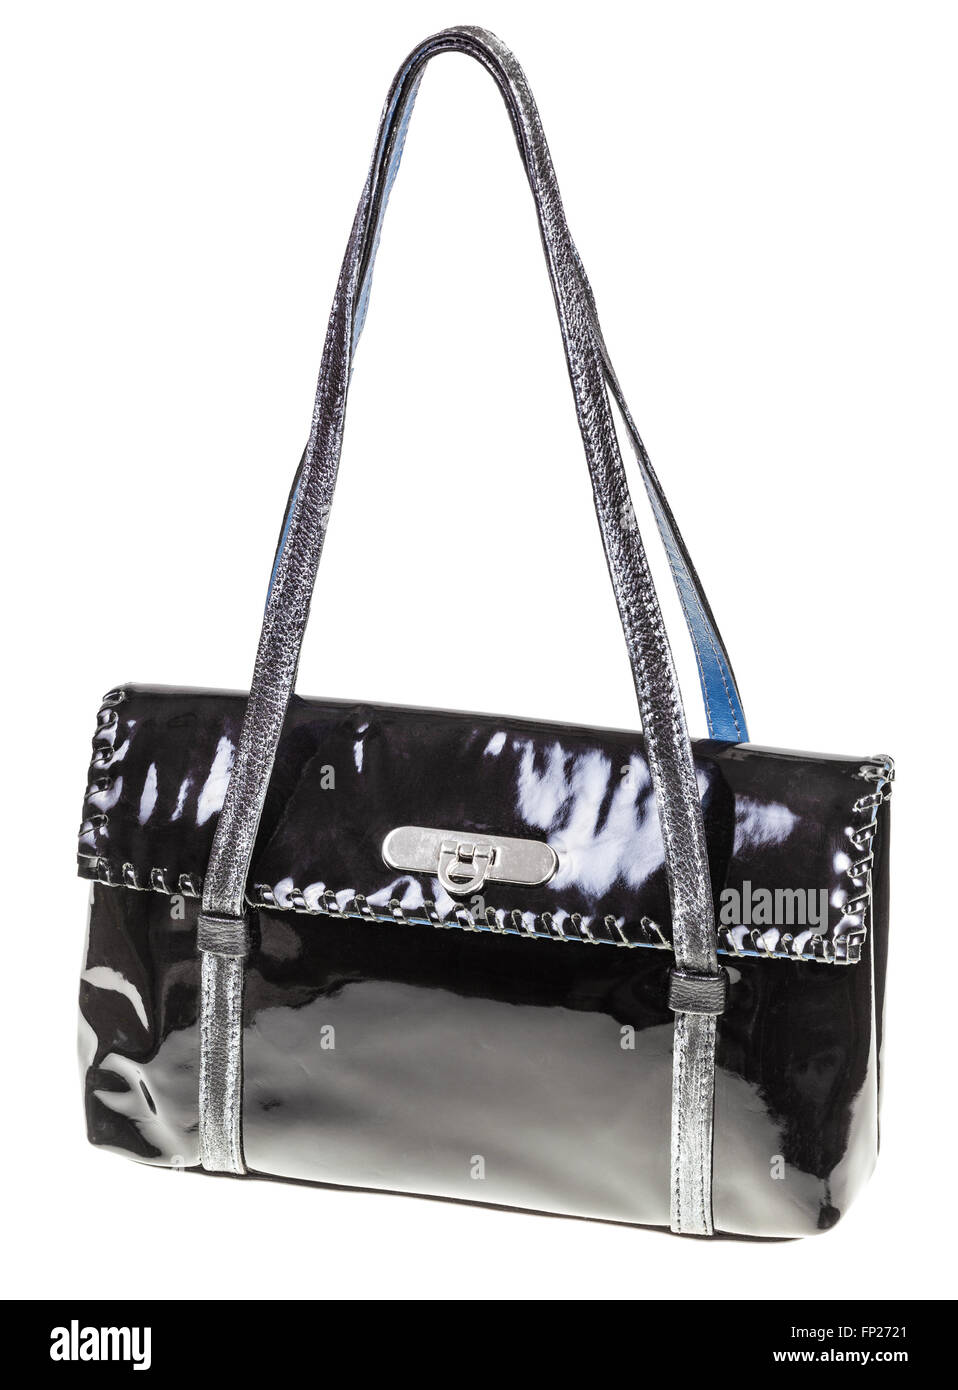 Share 77+ black patent leather bags best - in.duhocakina